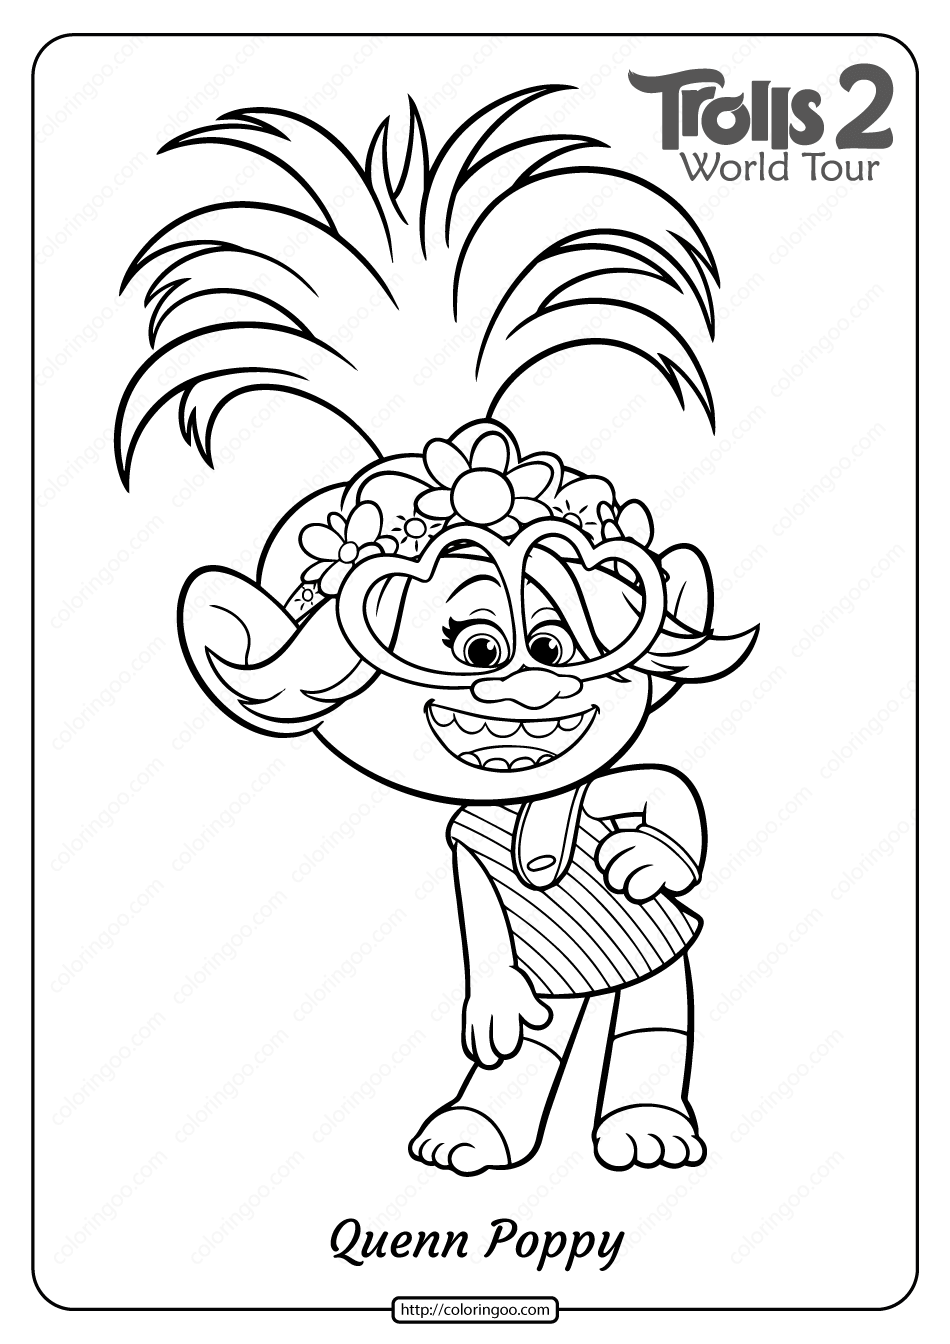 Free Printable Trolls 2 Queen Poppy Coloring Page | Poppy coloring page,  Monster coloring pages, Cartoon coloring pages